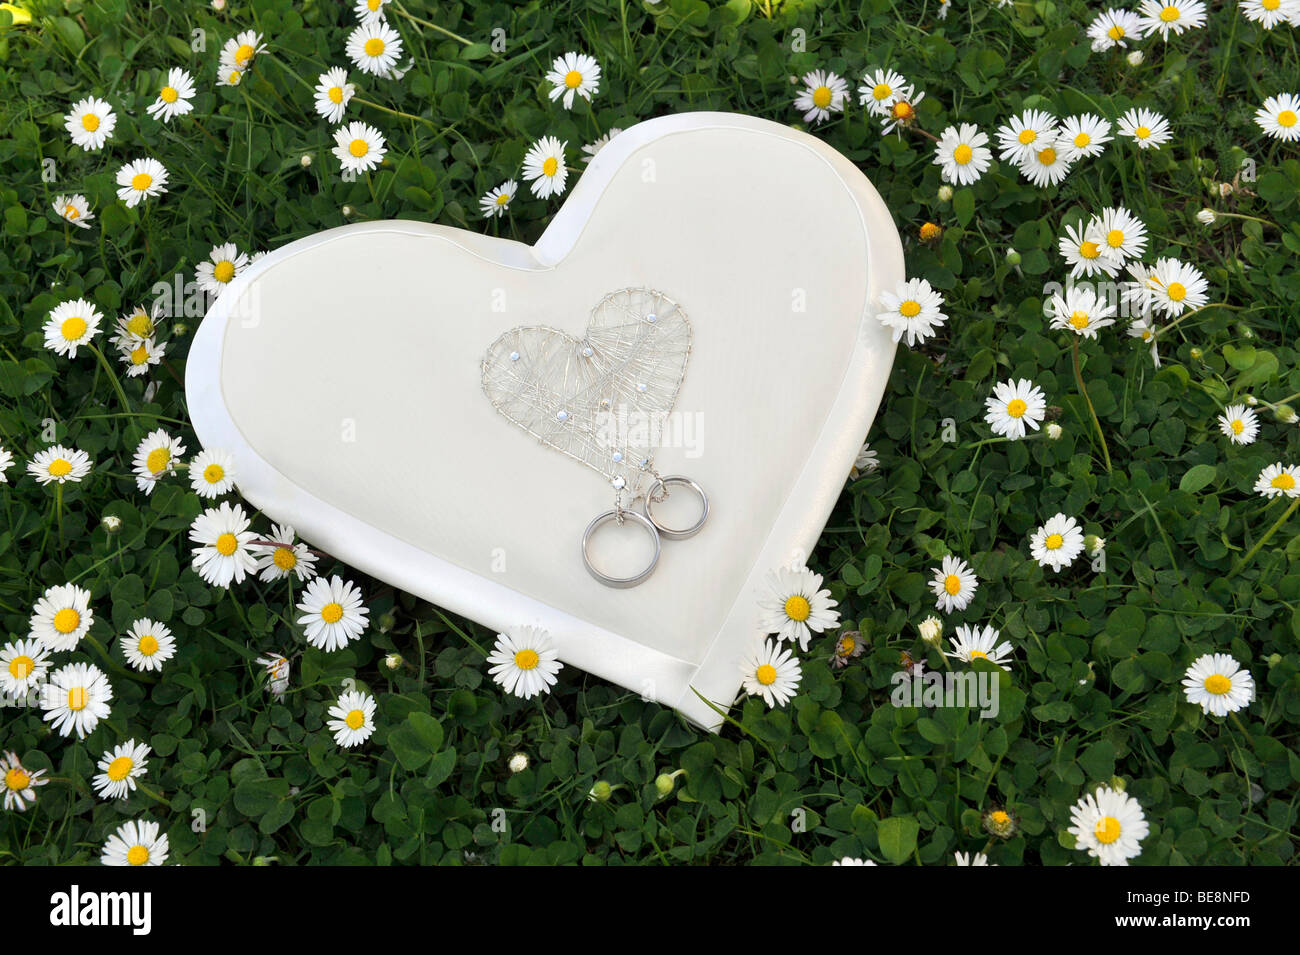 Heart-shaped ring pillow with wedding rings in the grass with daisies Stock Photo